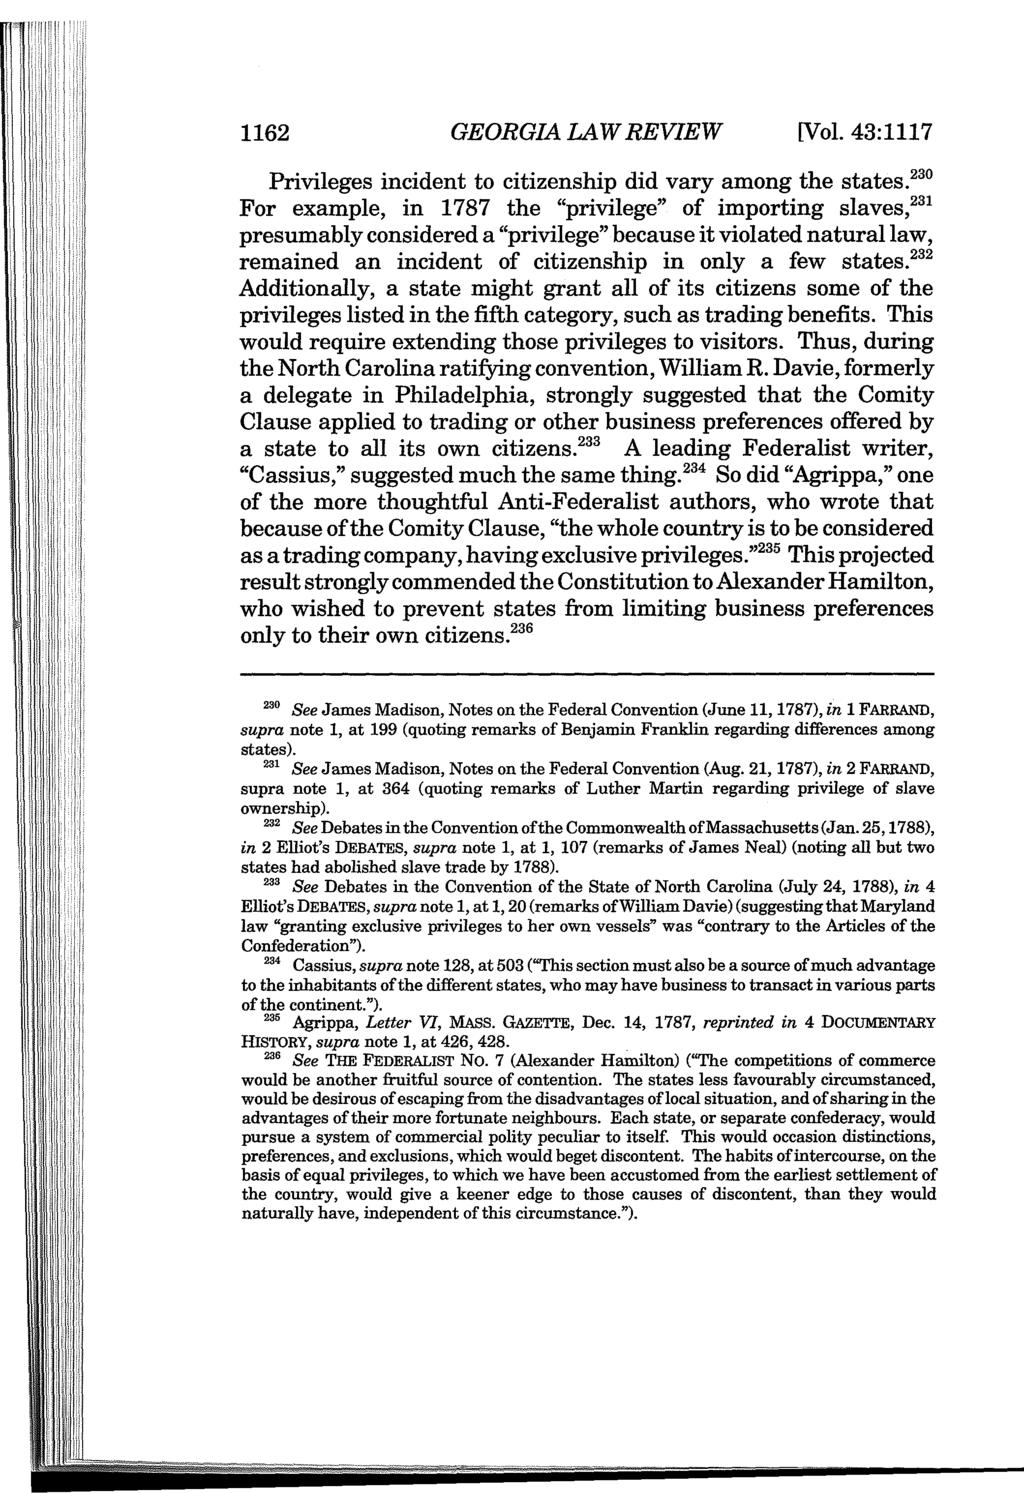 1162 GEORGIA LAWREVIEW [Vol. 43:1117 Privileges incident to citizenship did vary among the states. 230 For example, in 1787 the "privilege" of importing slaves.